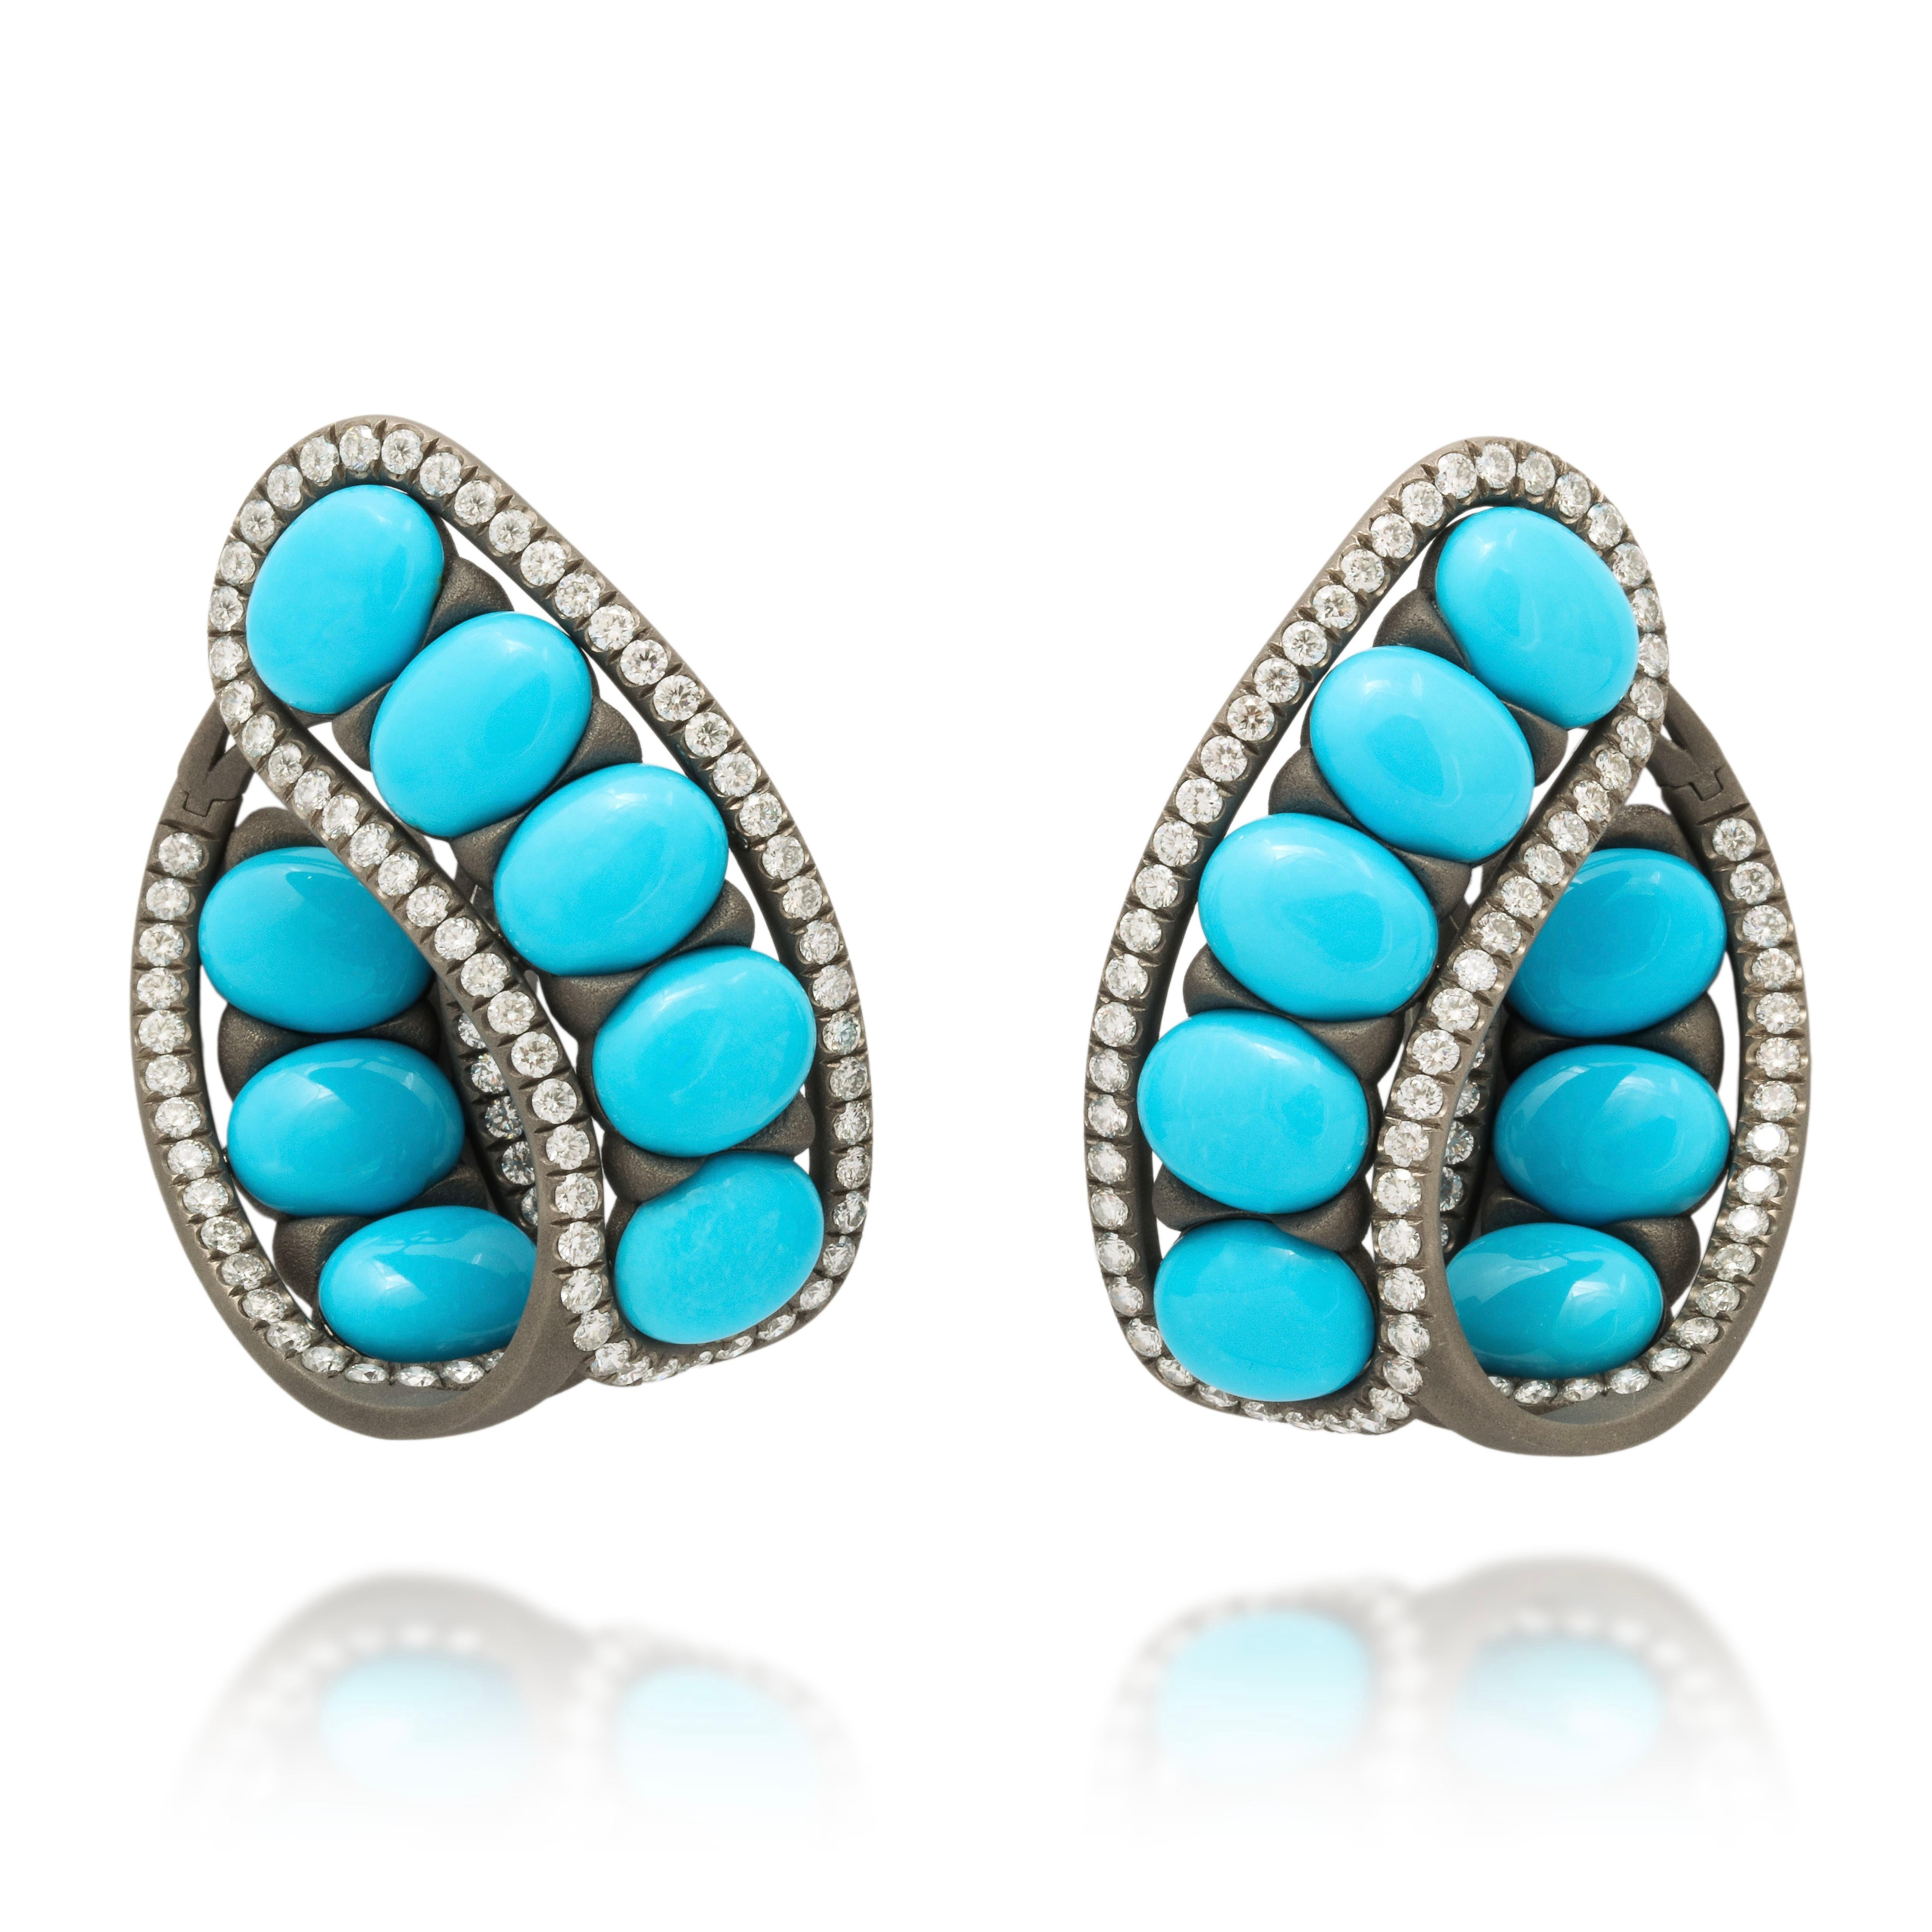 Michael Kanners Turquoise Diamond and Titanium Earrings In New Condition For Sale In Bal Harbour, FL